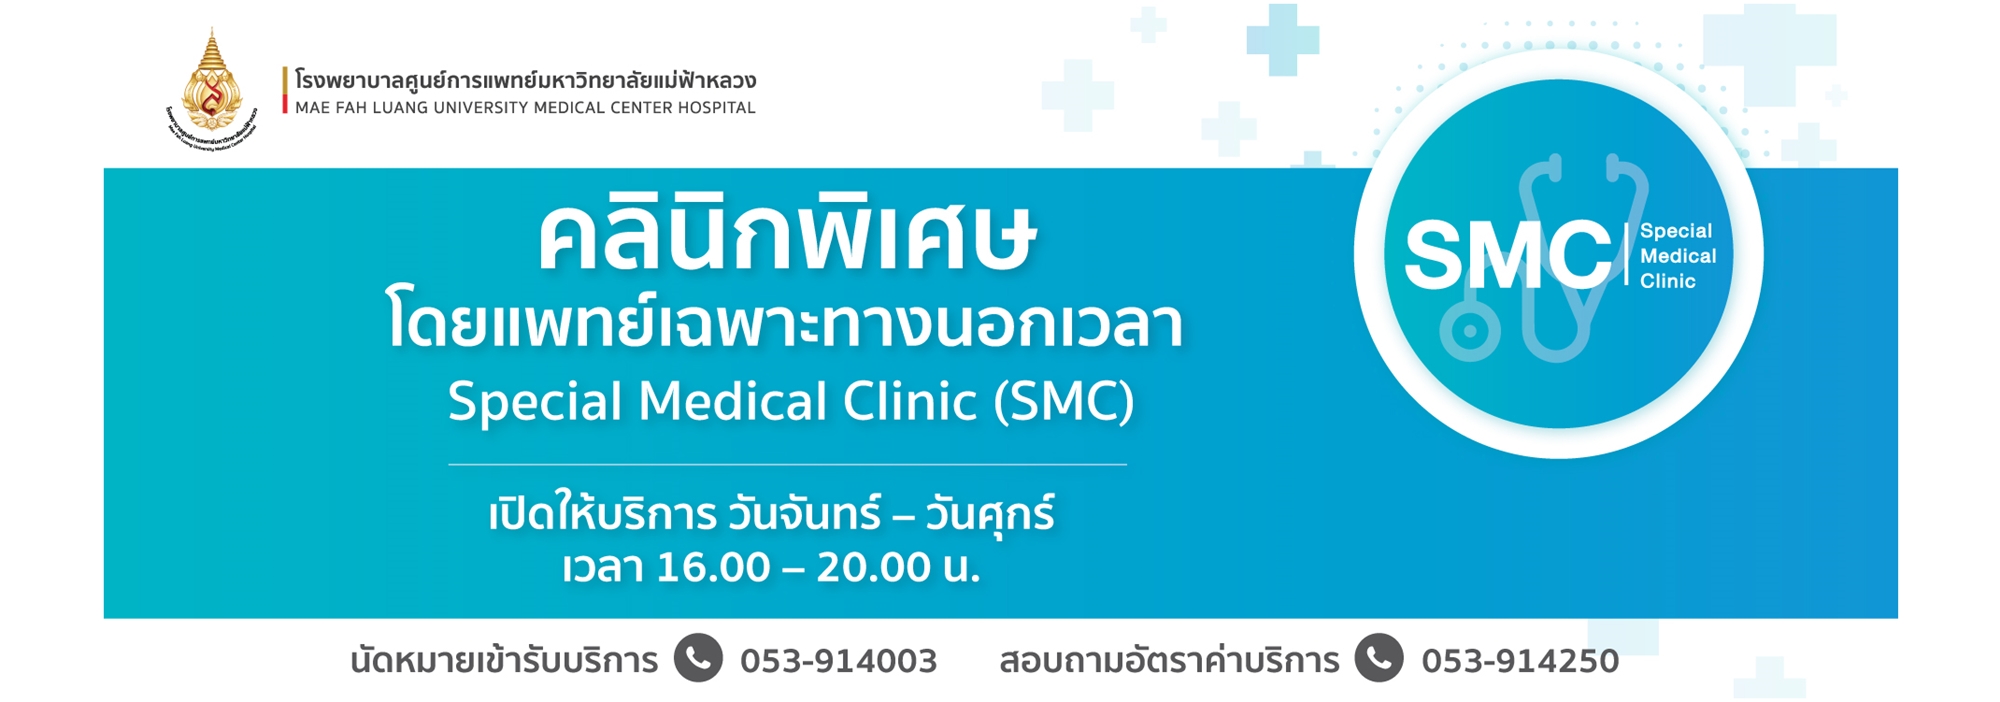 Special Medical Clinic (SMC)